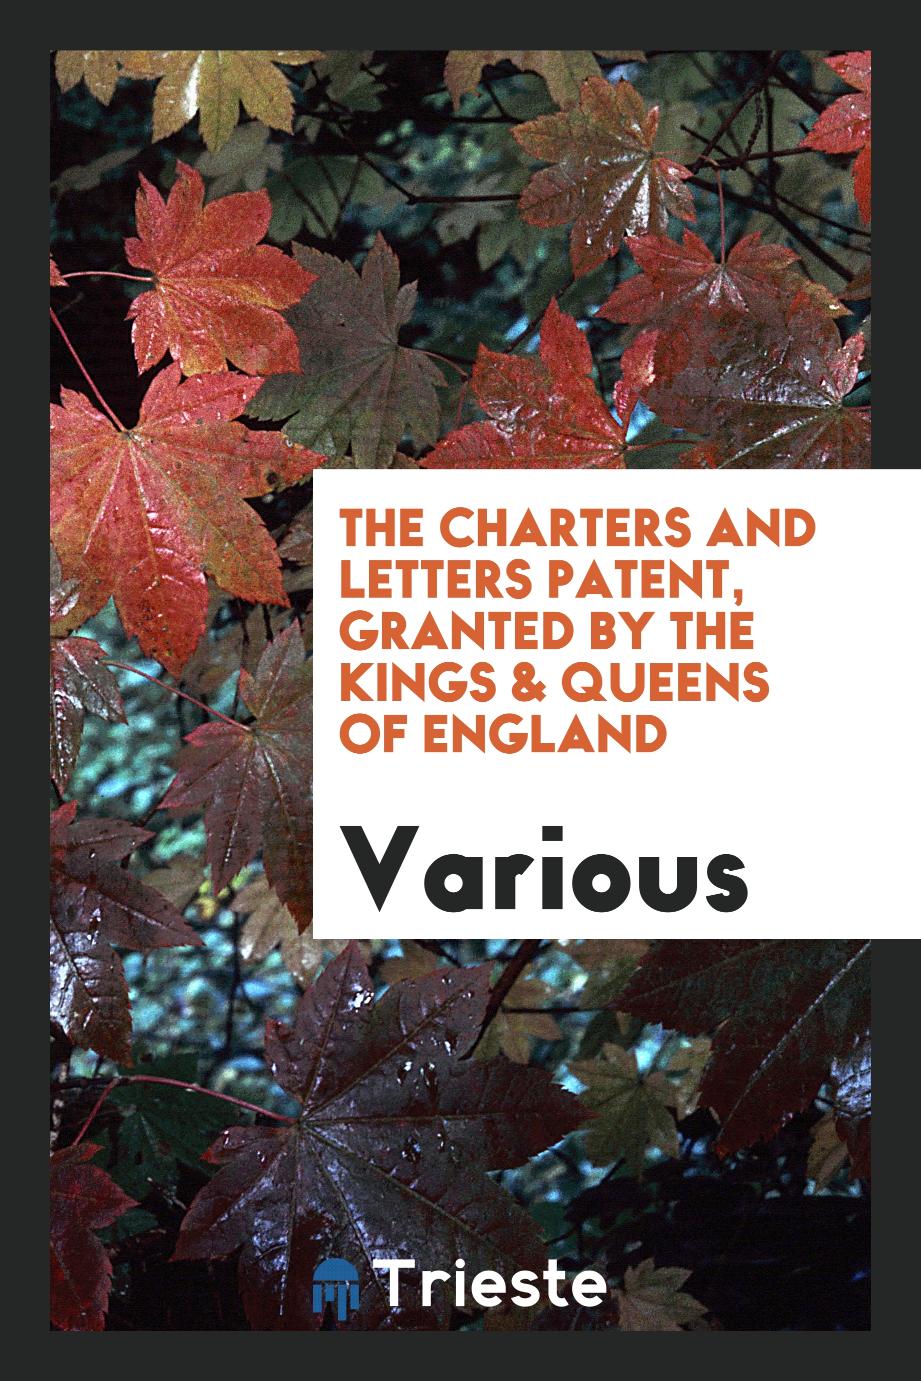 The Charters and Letters Patent, Granted by the Kings & Queens of England